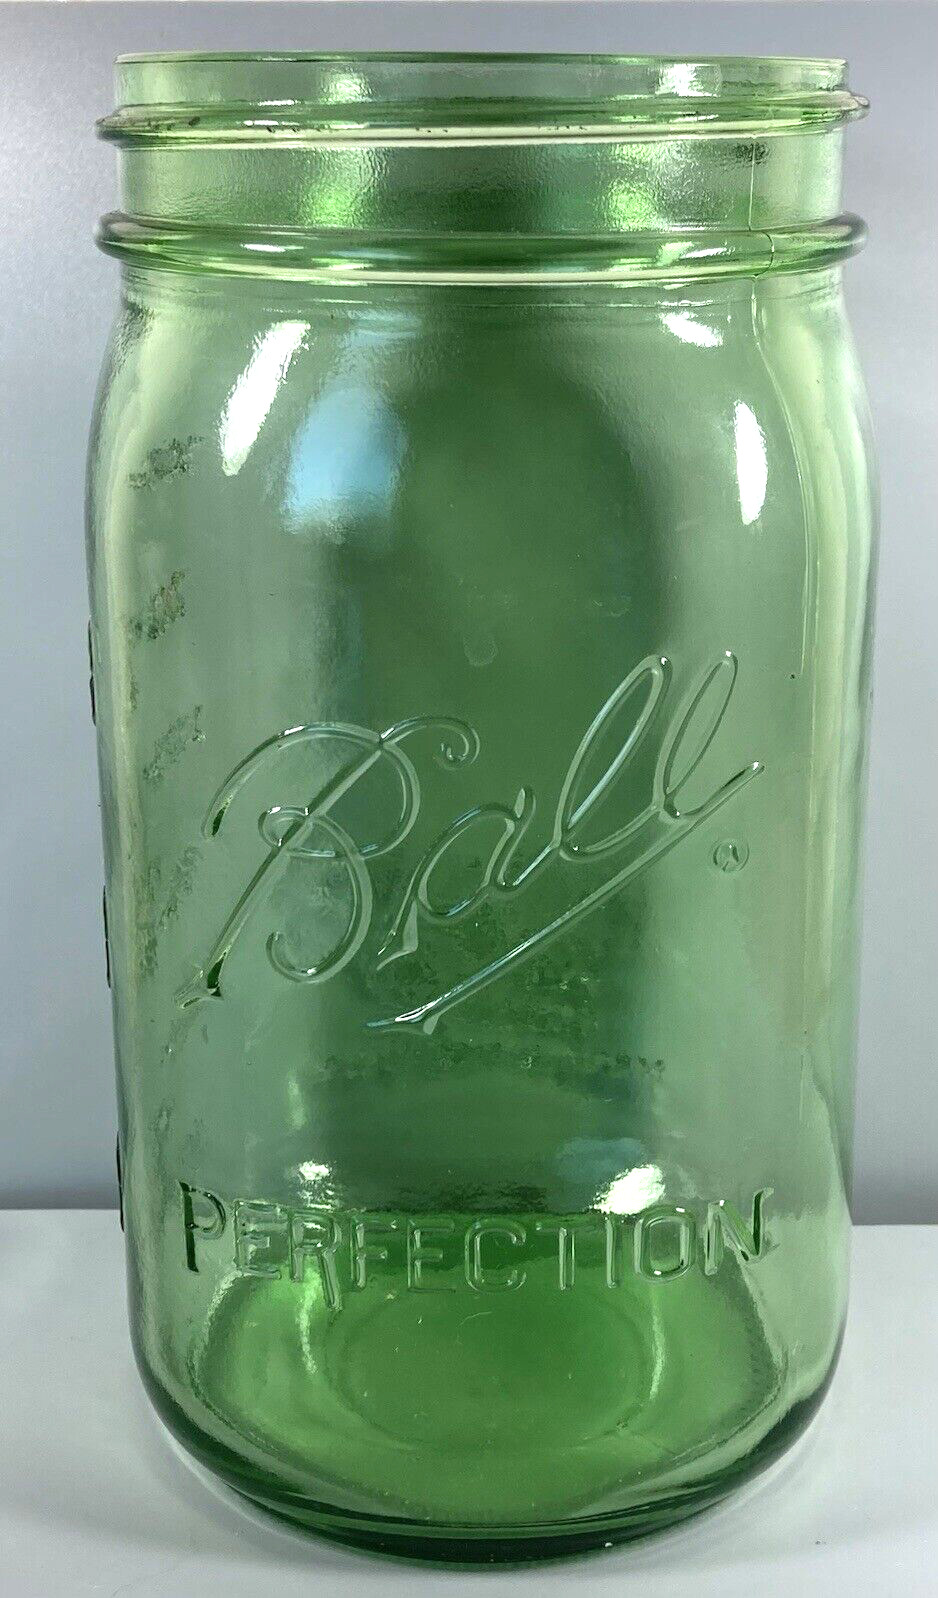 Ball Perfection Green Mason Jar 1913-1915 100 Years American Heritage Wide Mouth